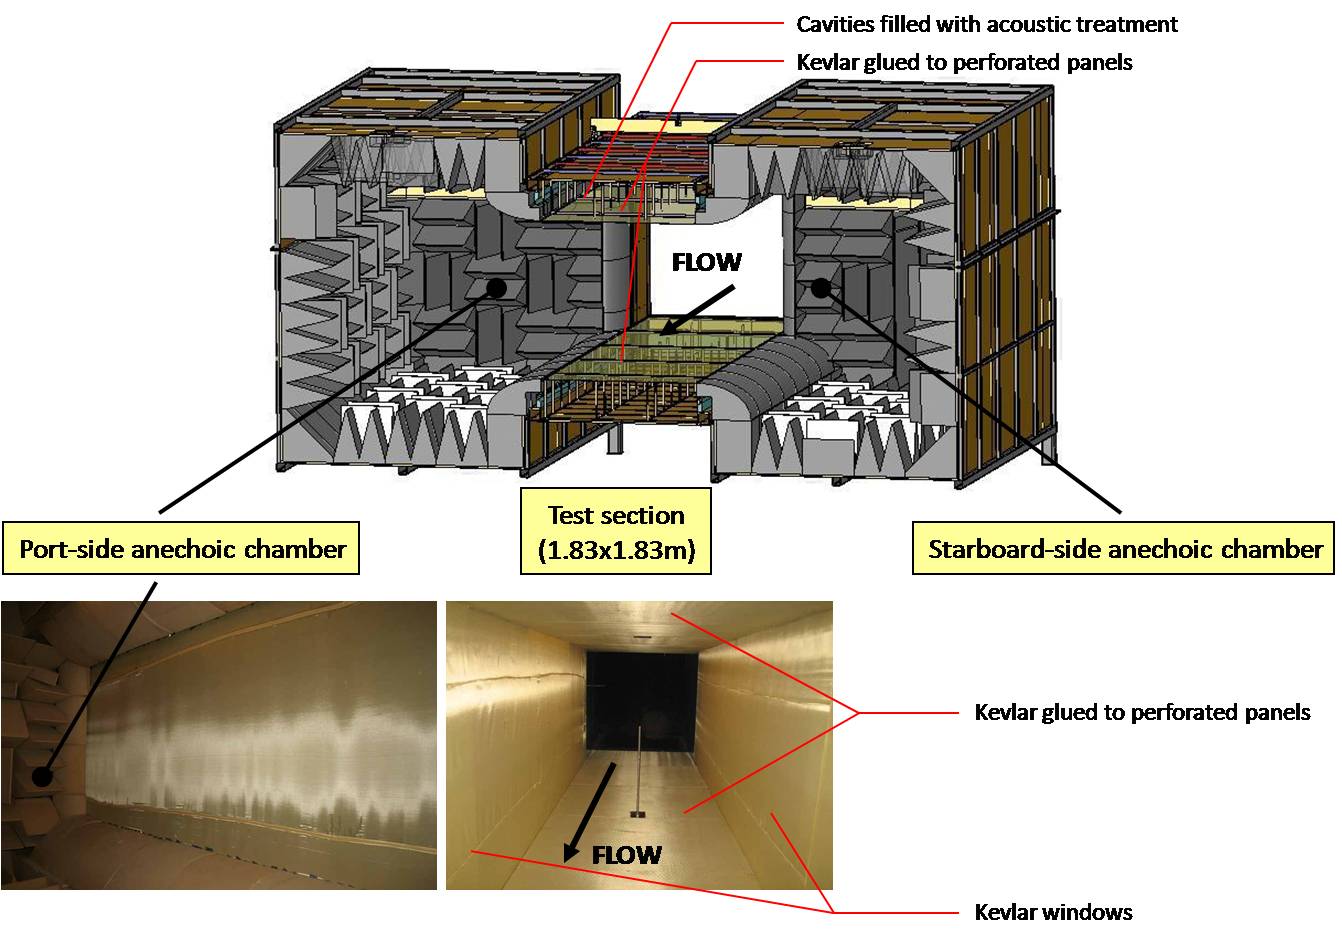 Details of the hybrid anechoic system (cut-out view, inside the test-section, and from the port-side anechoic chamber)